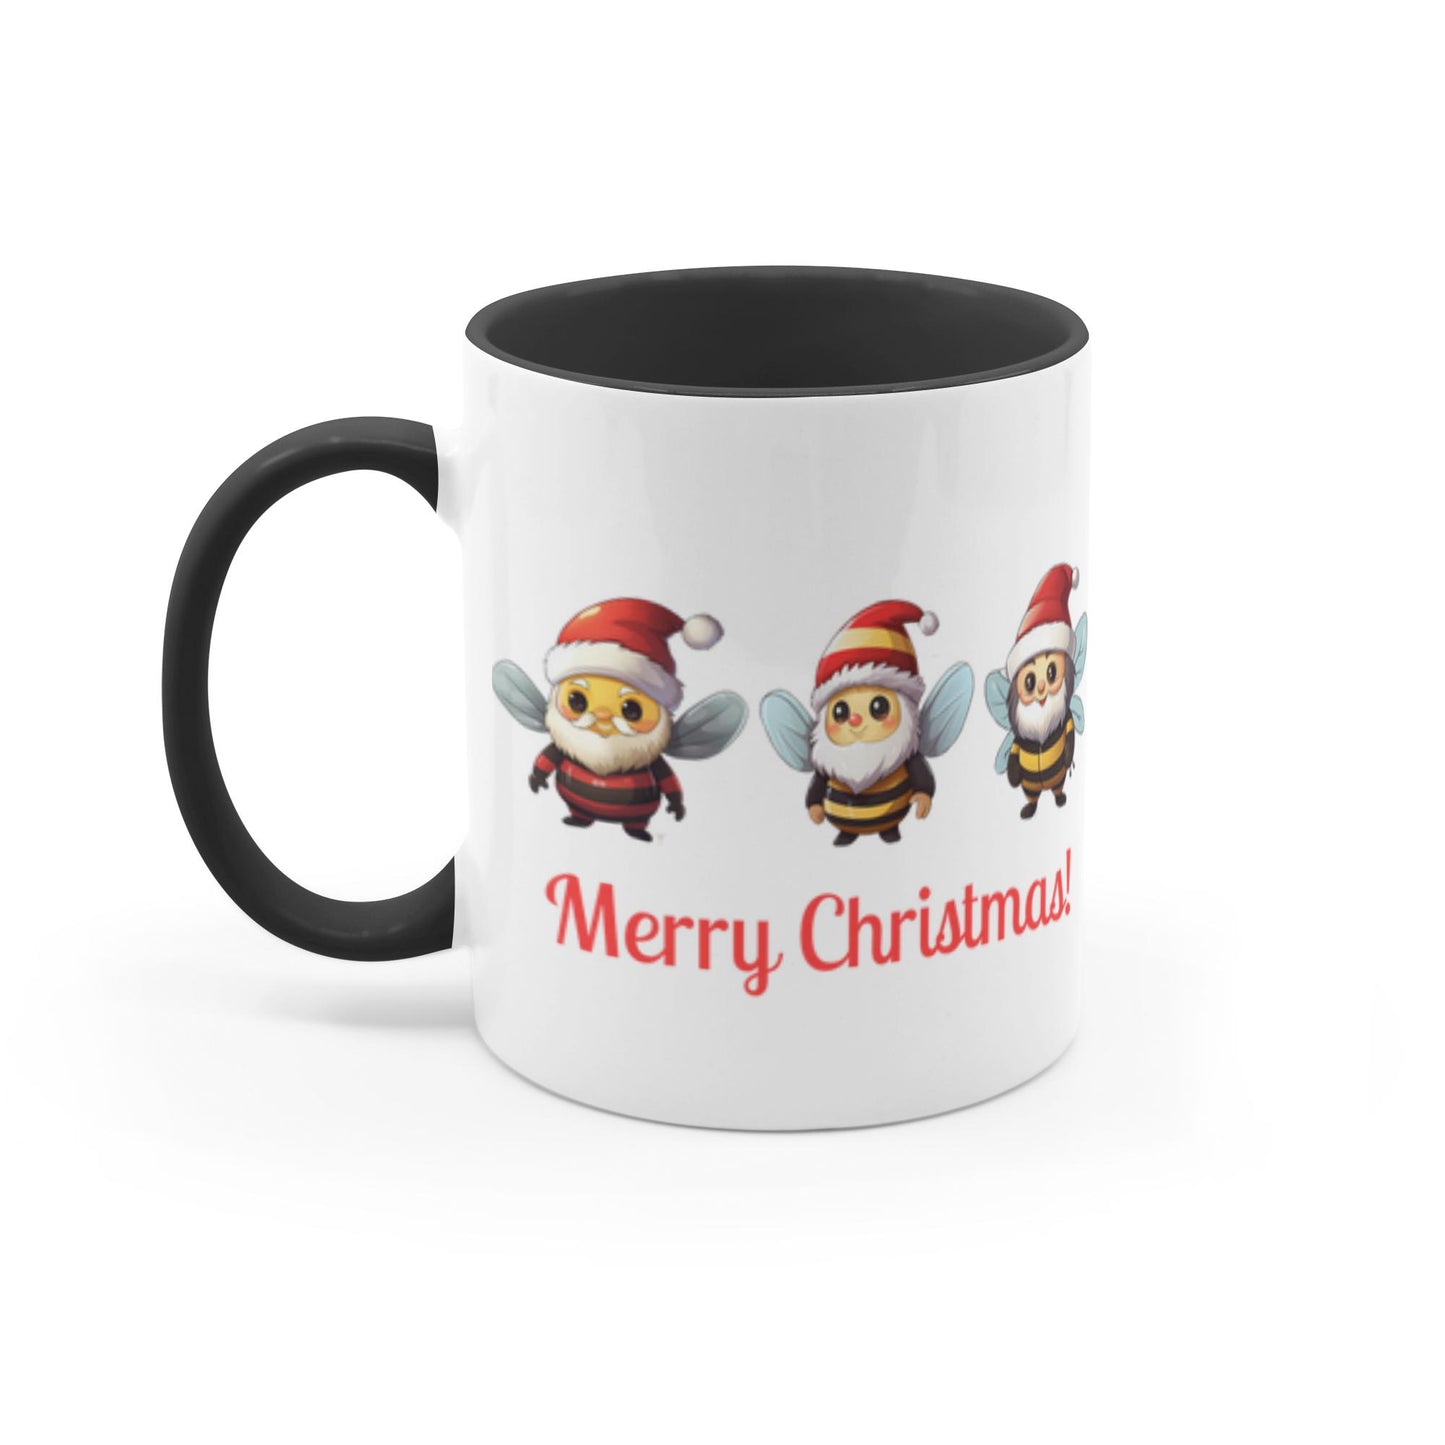 Merry Christmas 11 oz. Accent Mug 11 oz White with Black Accents Coffee & Tea Cups gifts holiday store